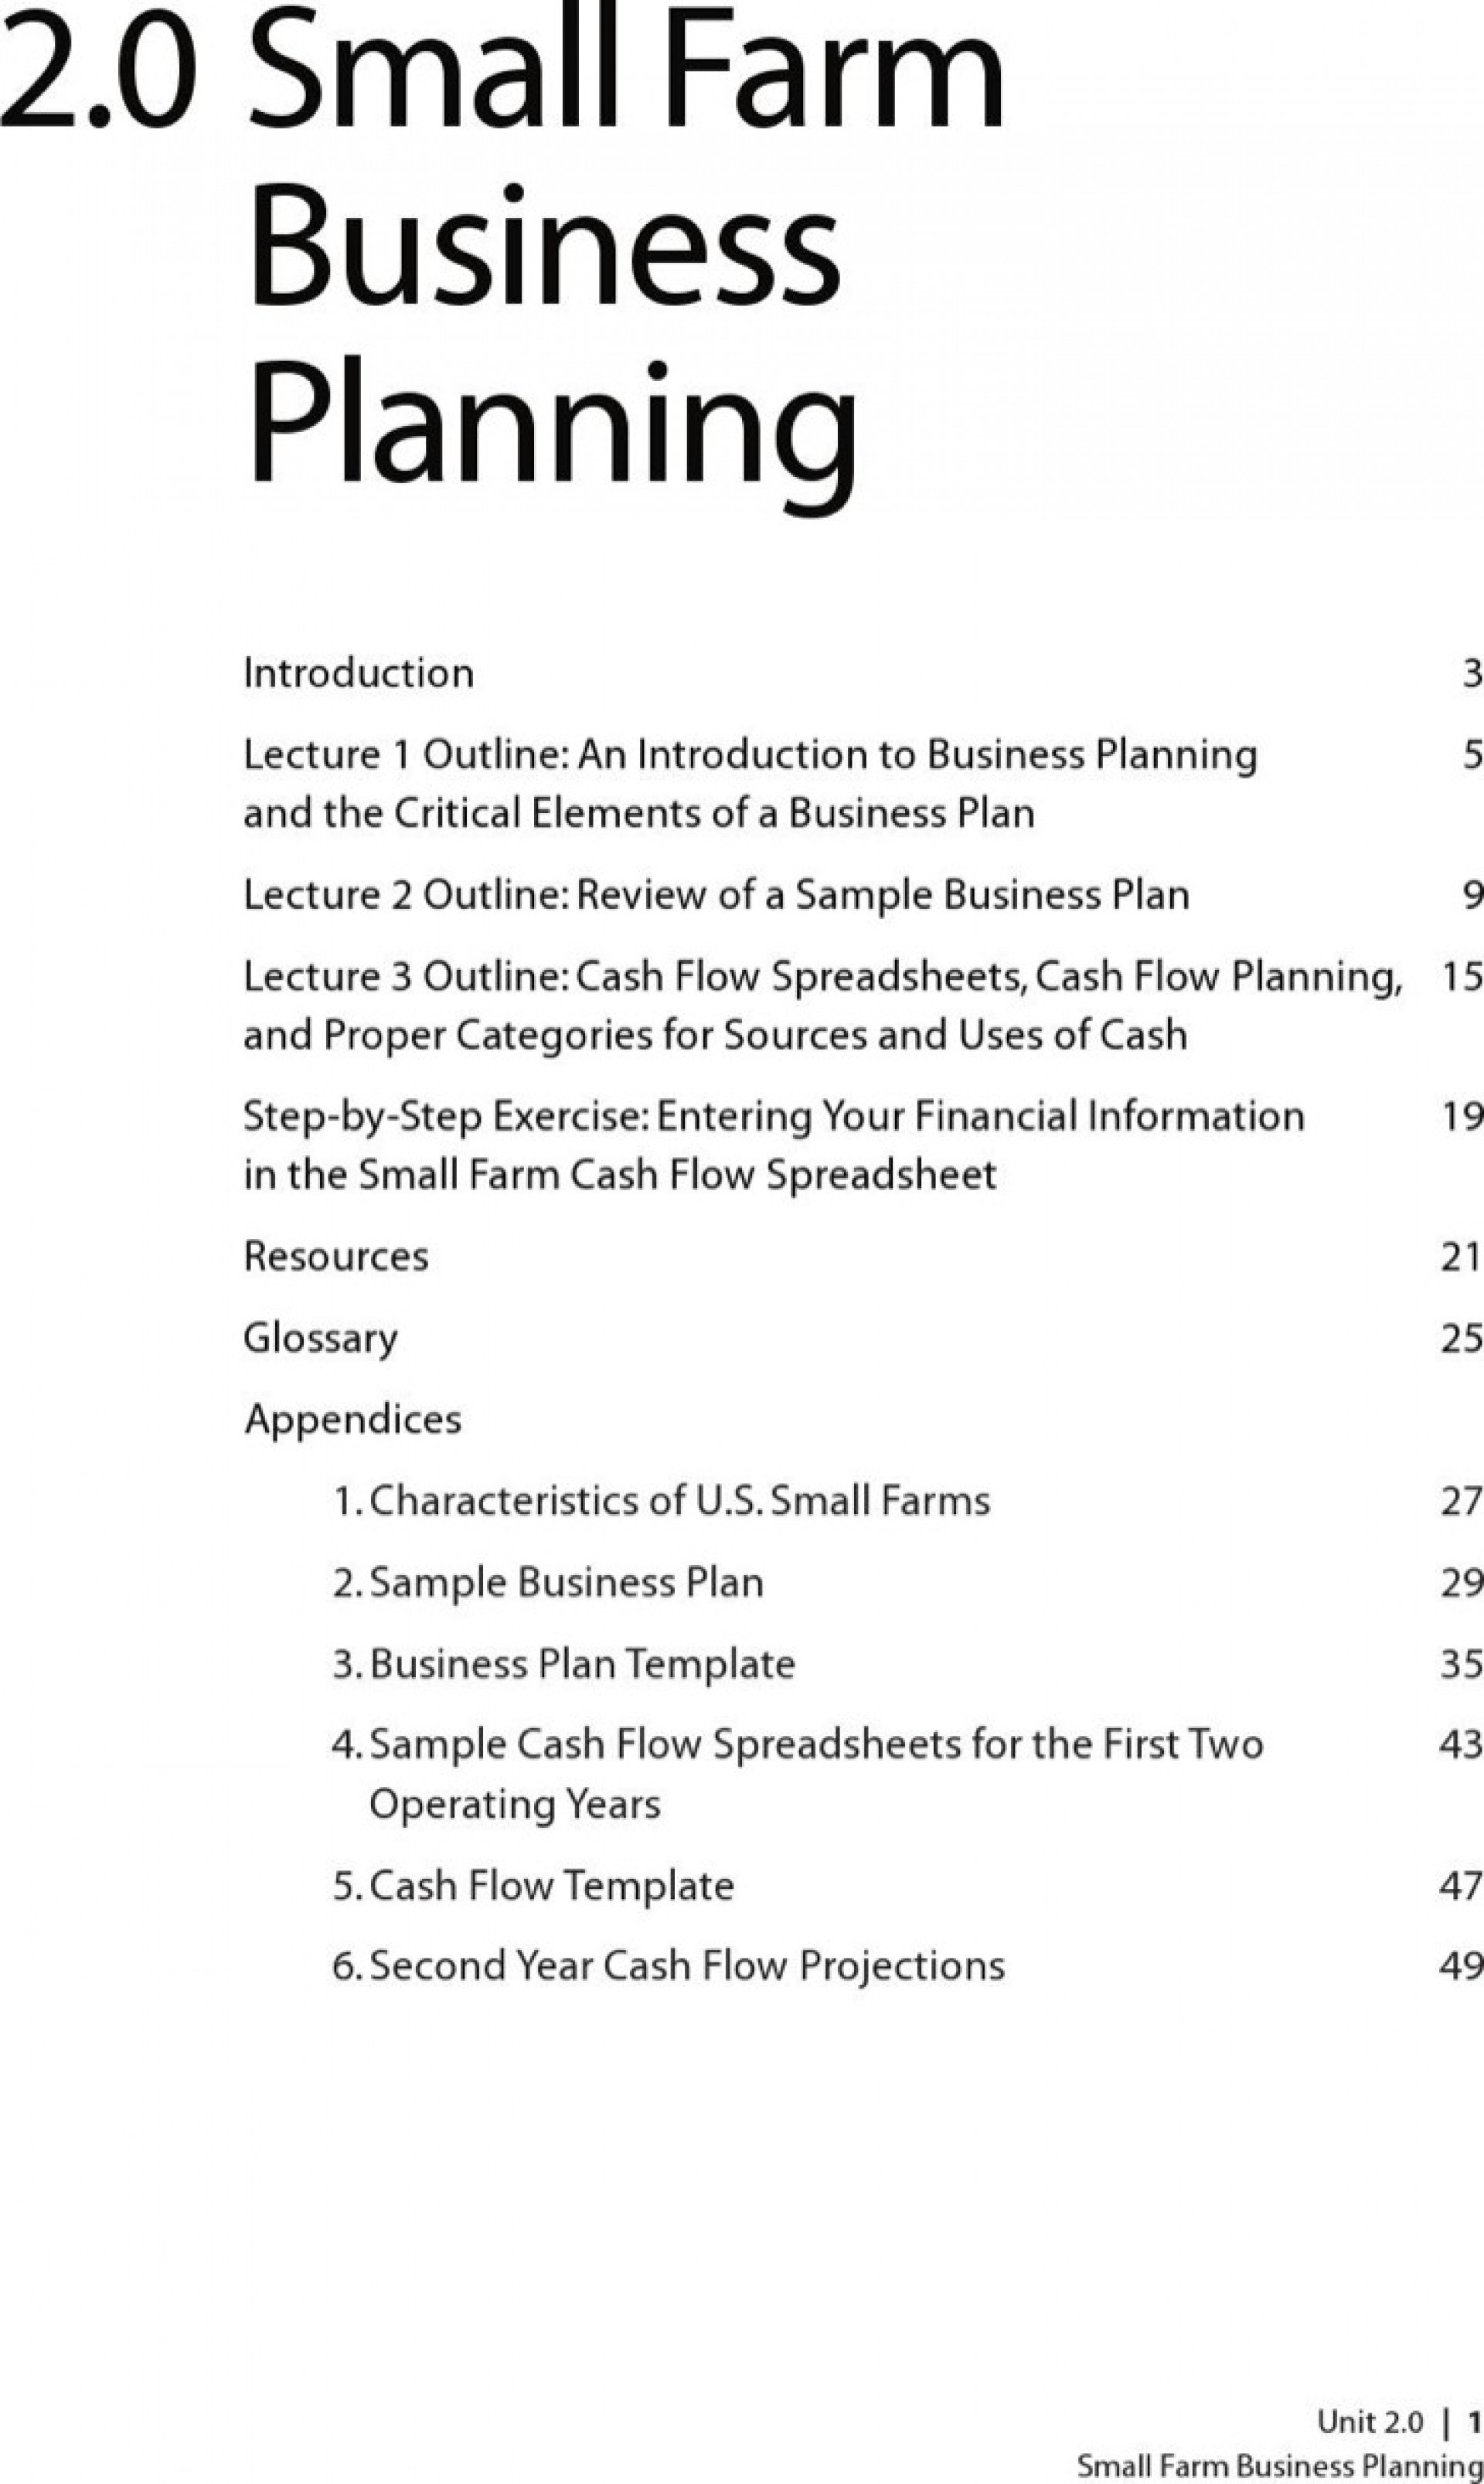 Wonderful Agriculture Business Plan Template Free Templates ~ Fanmailus intended for Agriculture Business Plan Template Free